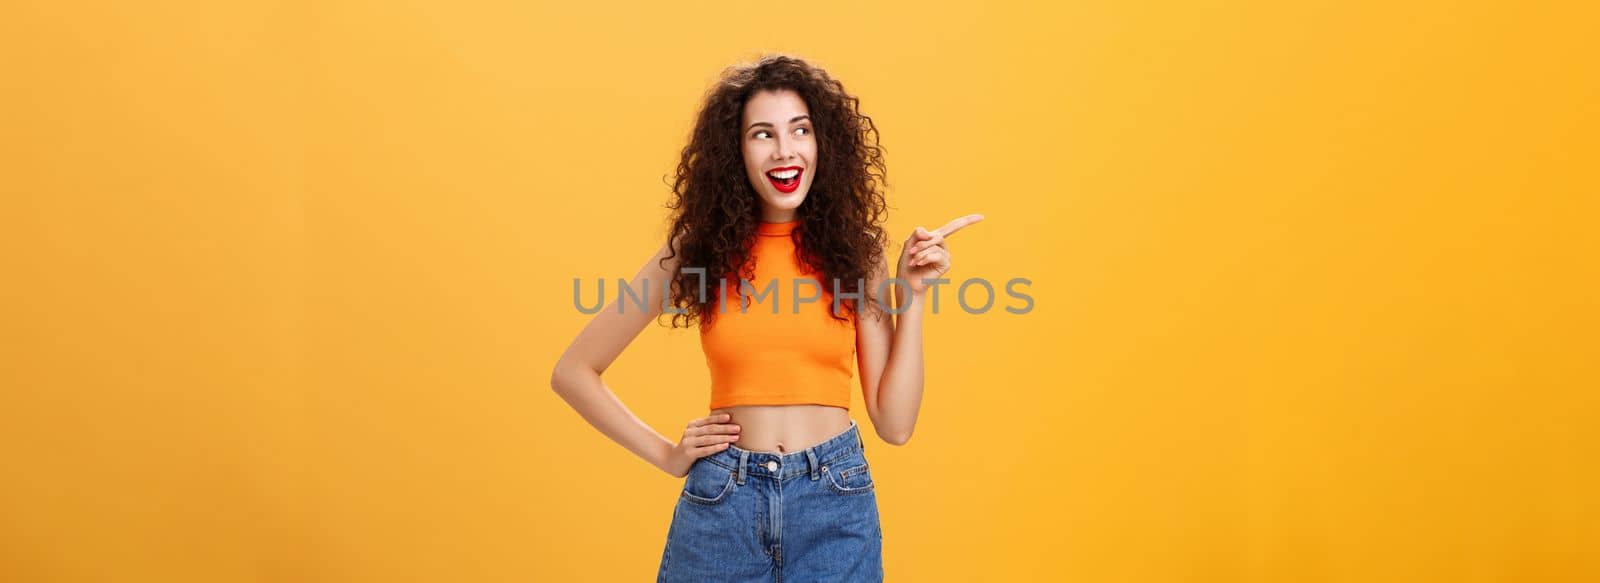 Portrait of delighted enthusiastic stylish young woman. with curly hairstyle in red lipstick and cropped top holding hand on waist pointing and looking left amused and happy over orange background.